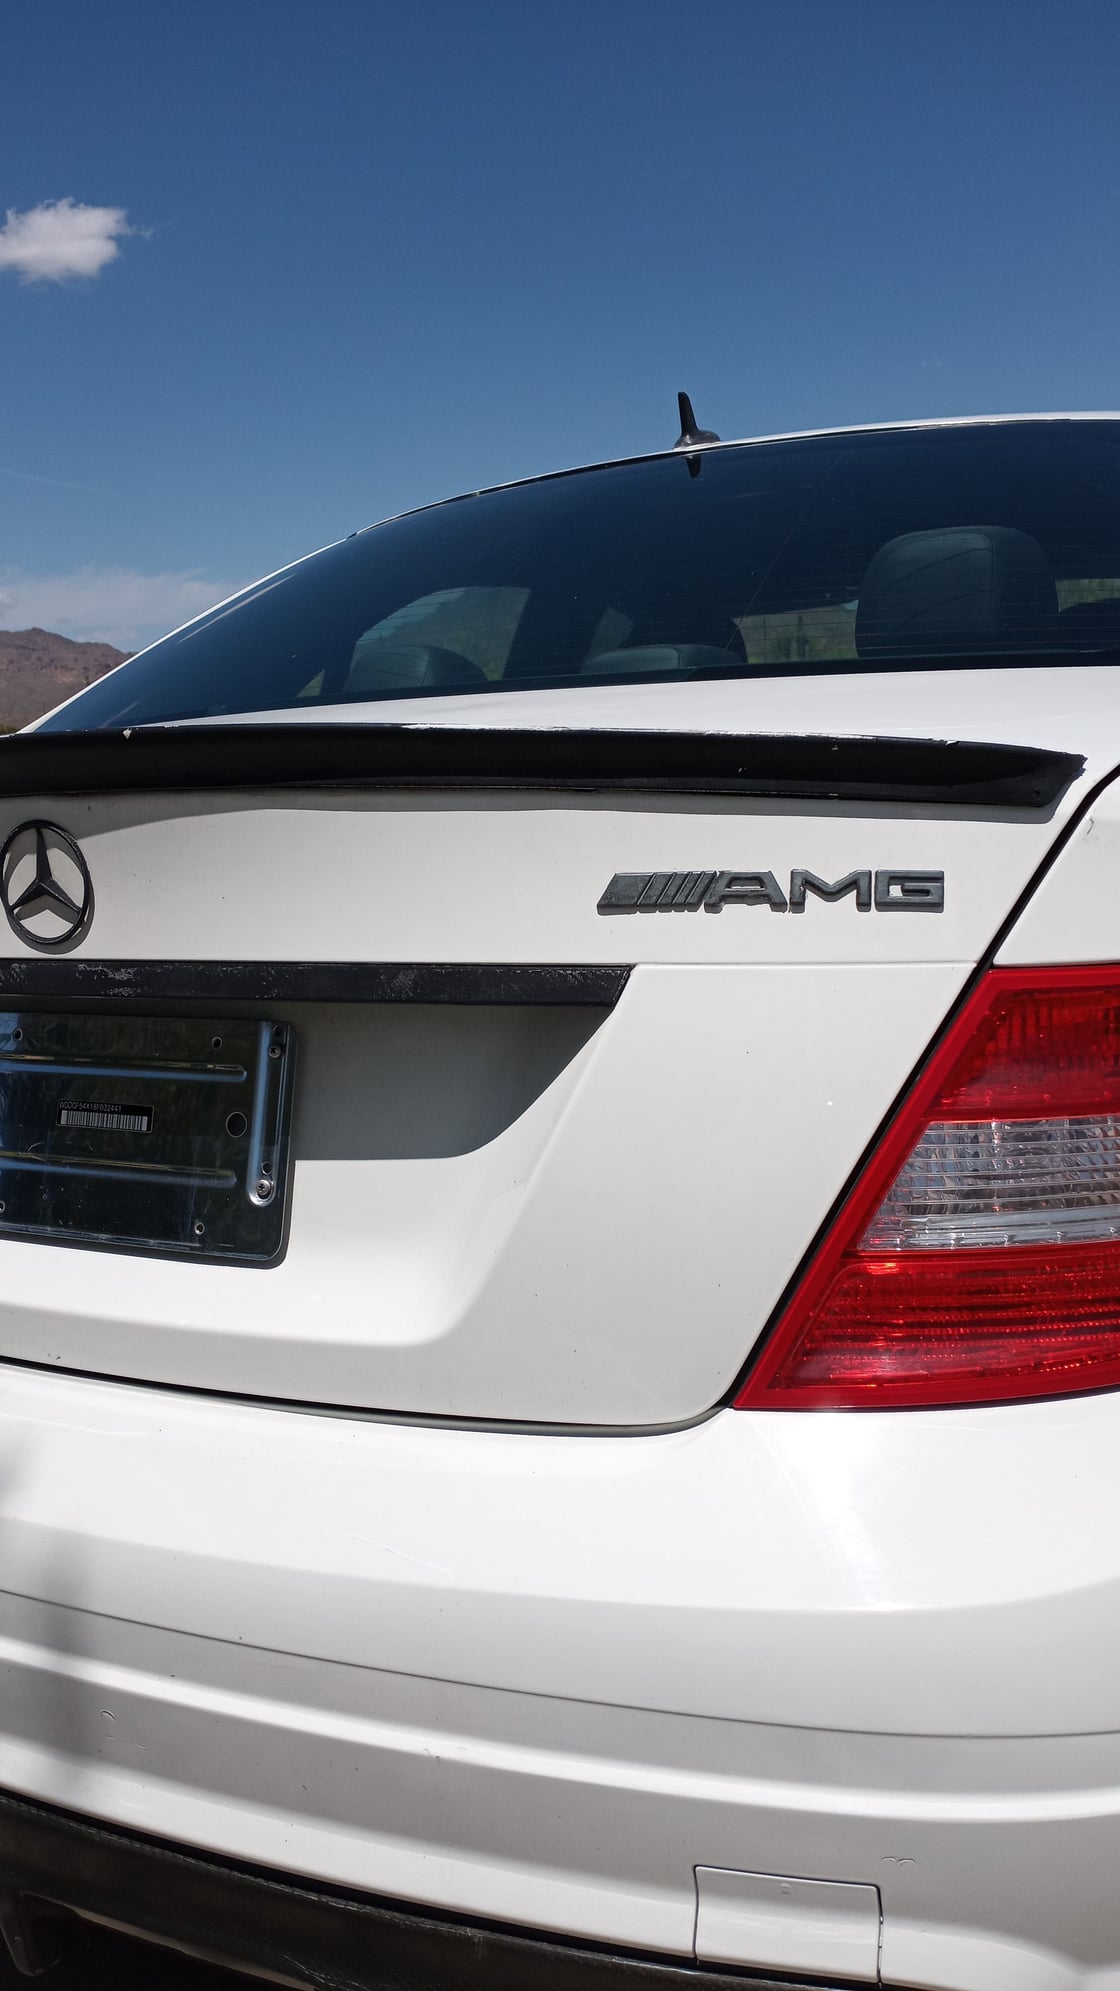 2008 Mercedes-Benz C300 - 2008 C300 Sport with AMG Body Package - Used - VIN WDDGF54X18F032441 - 138,000 Miles - 6 cyl - 2WD - Automatic - Sedan - White - Apache Junction, AZ 85120, United States